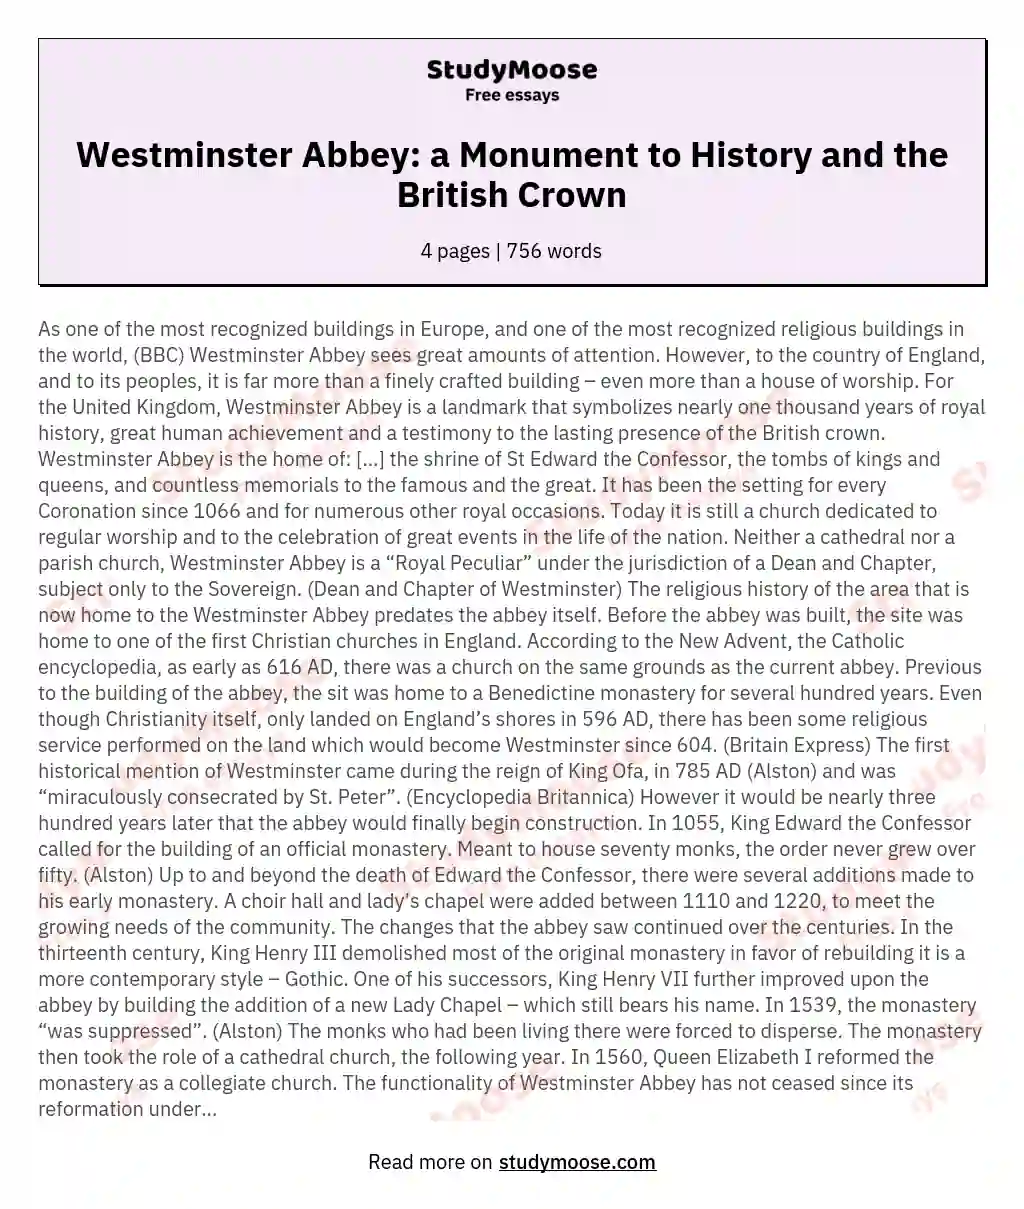 Westminster Abbey: a Monument to History and the British Crown essay